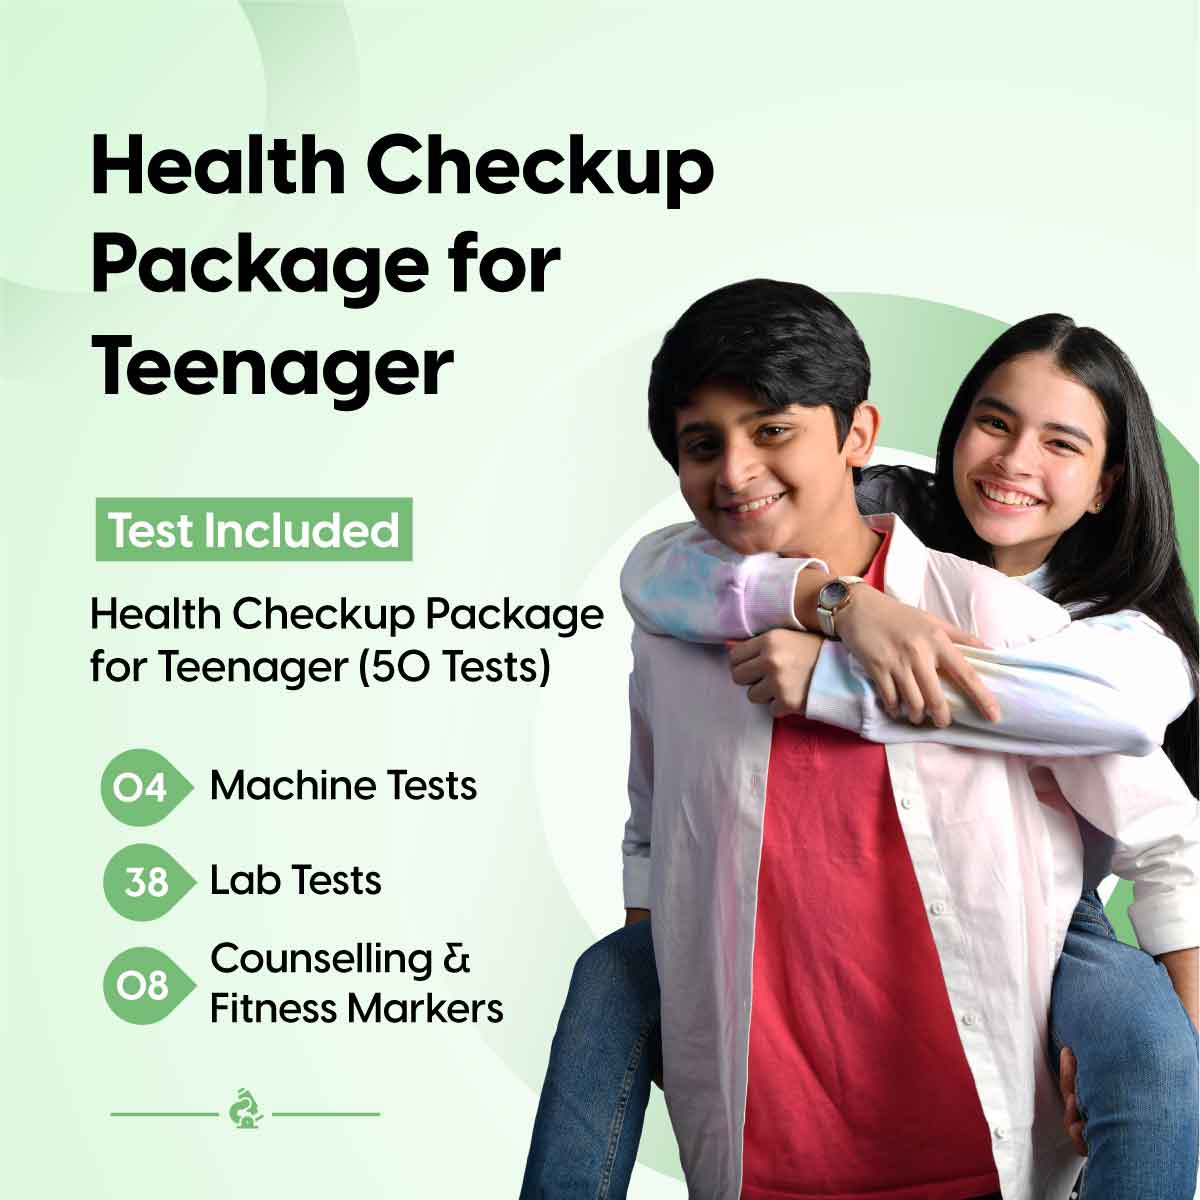 Health Checkup Package for Teenager